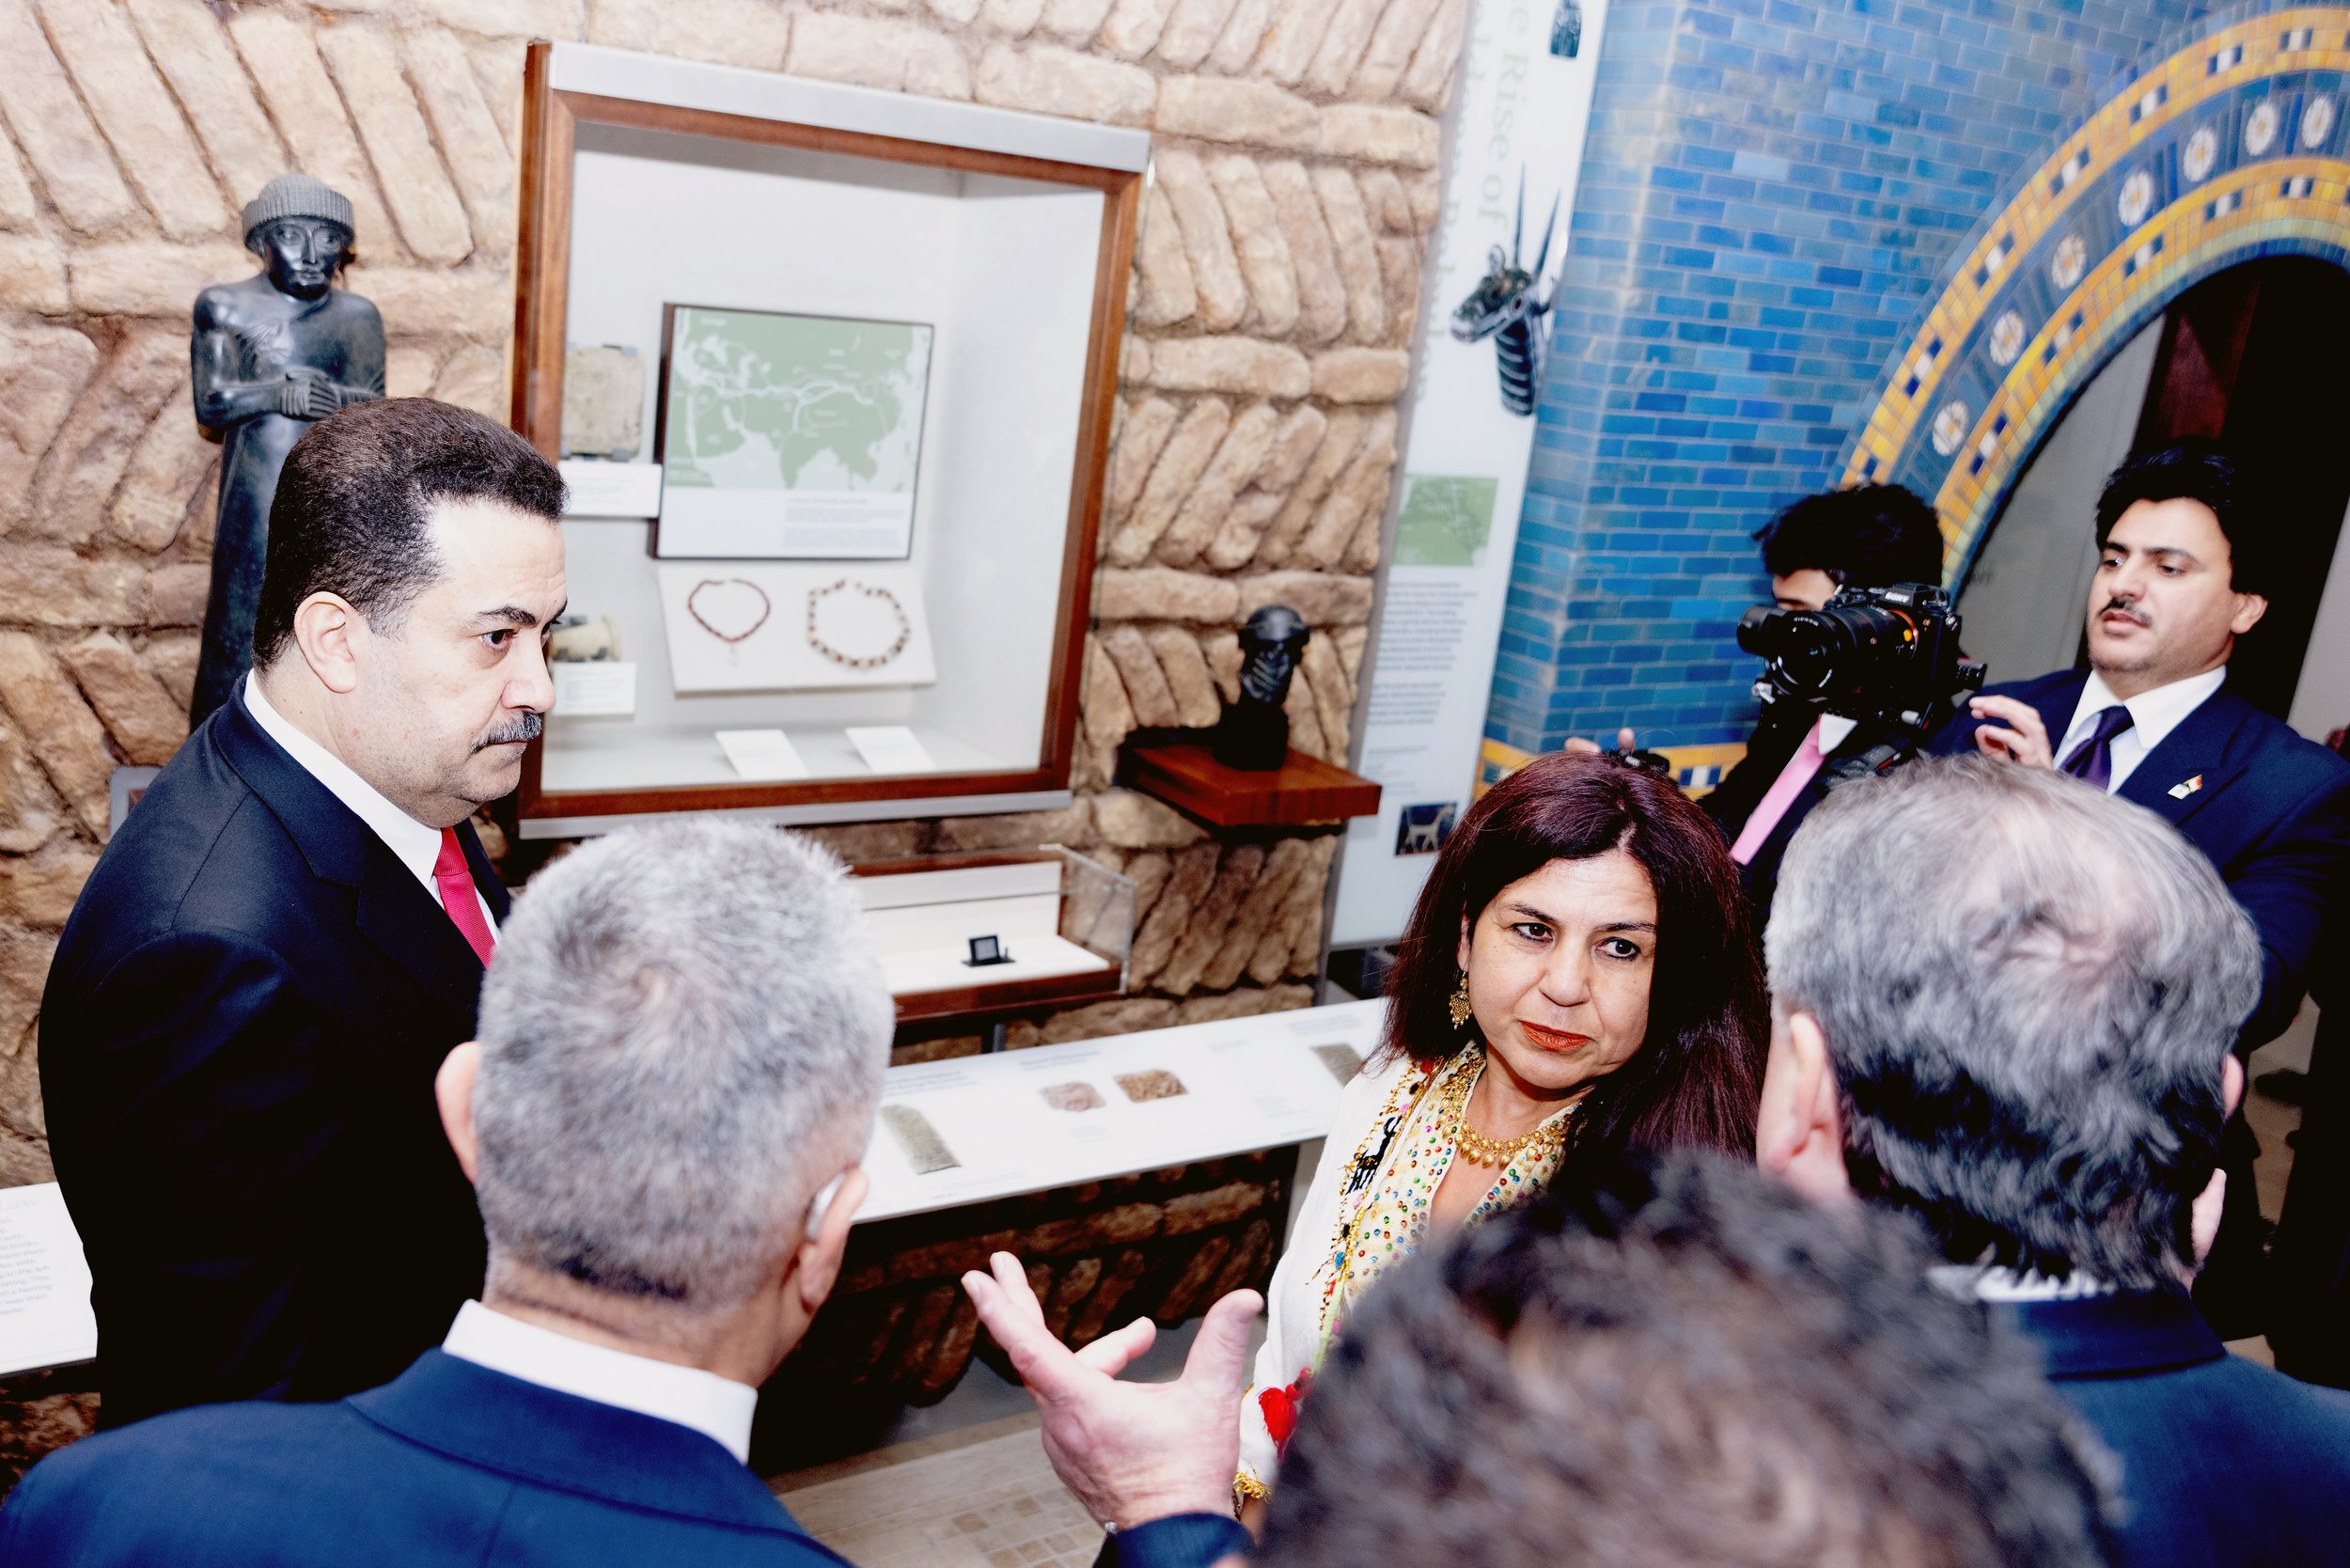  Raad Kathawa presents to Weam Namou, Prime Minister Al Sudani and others at the Chaldean Cultural Center. 